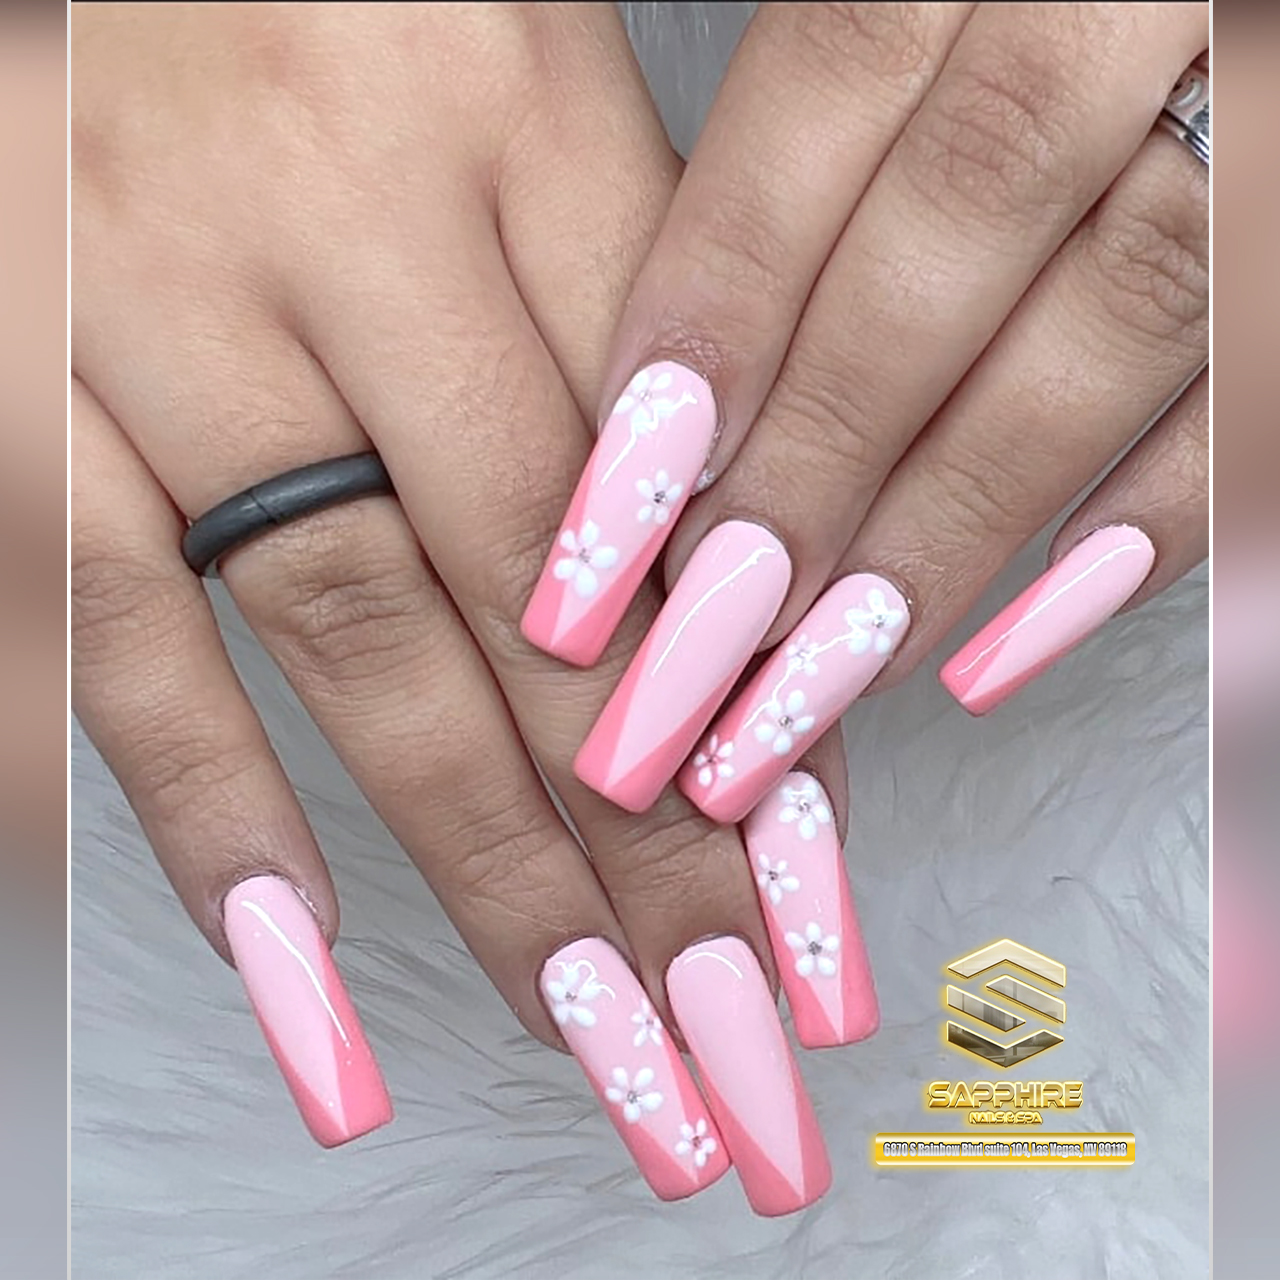 Sapphire Nails and Spa in Las Vegas, NV 89118